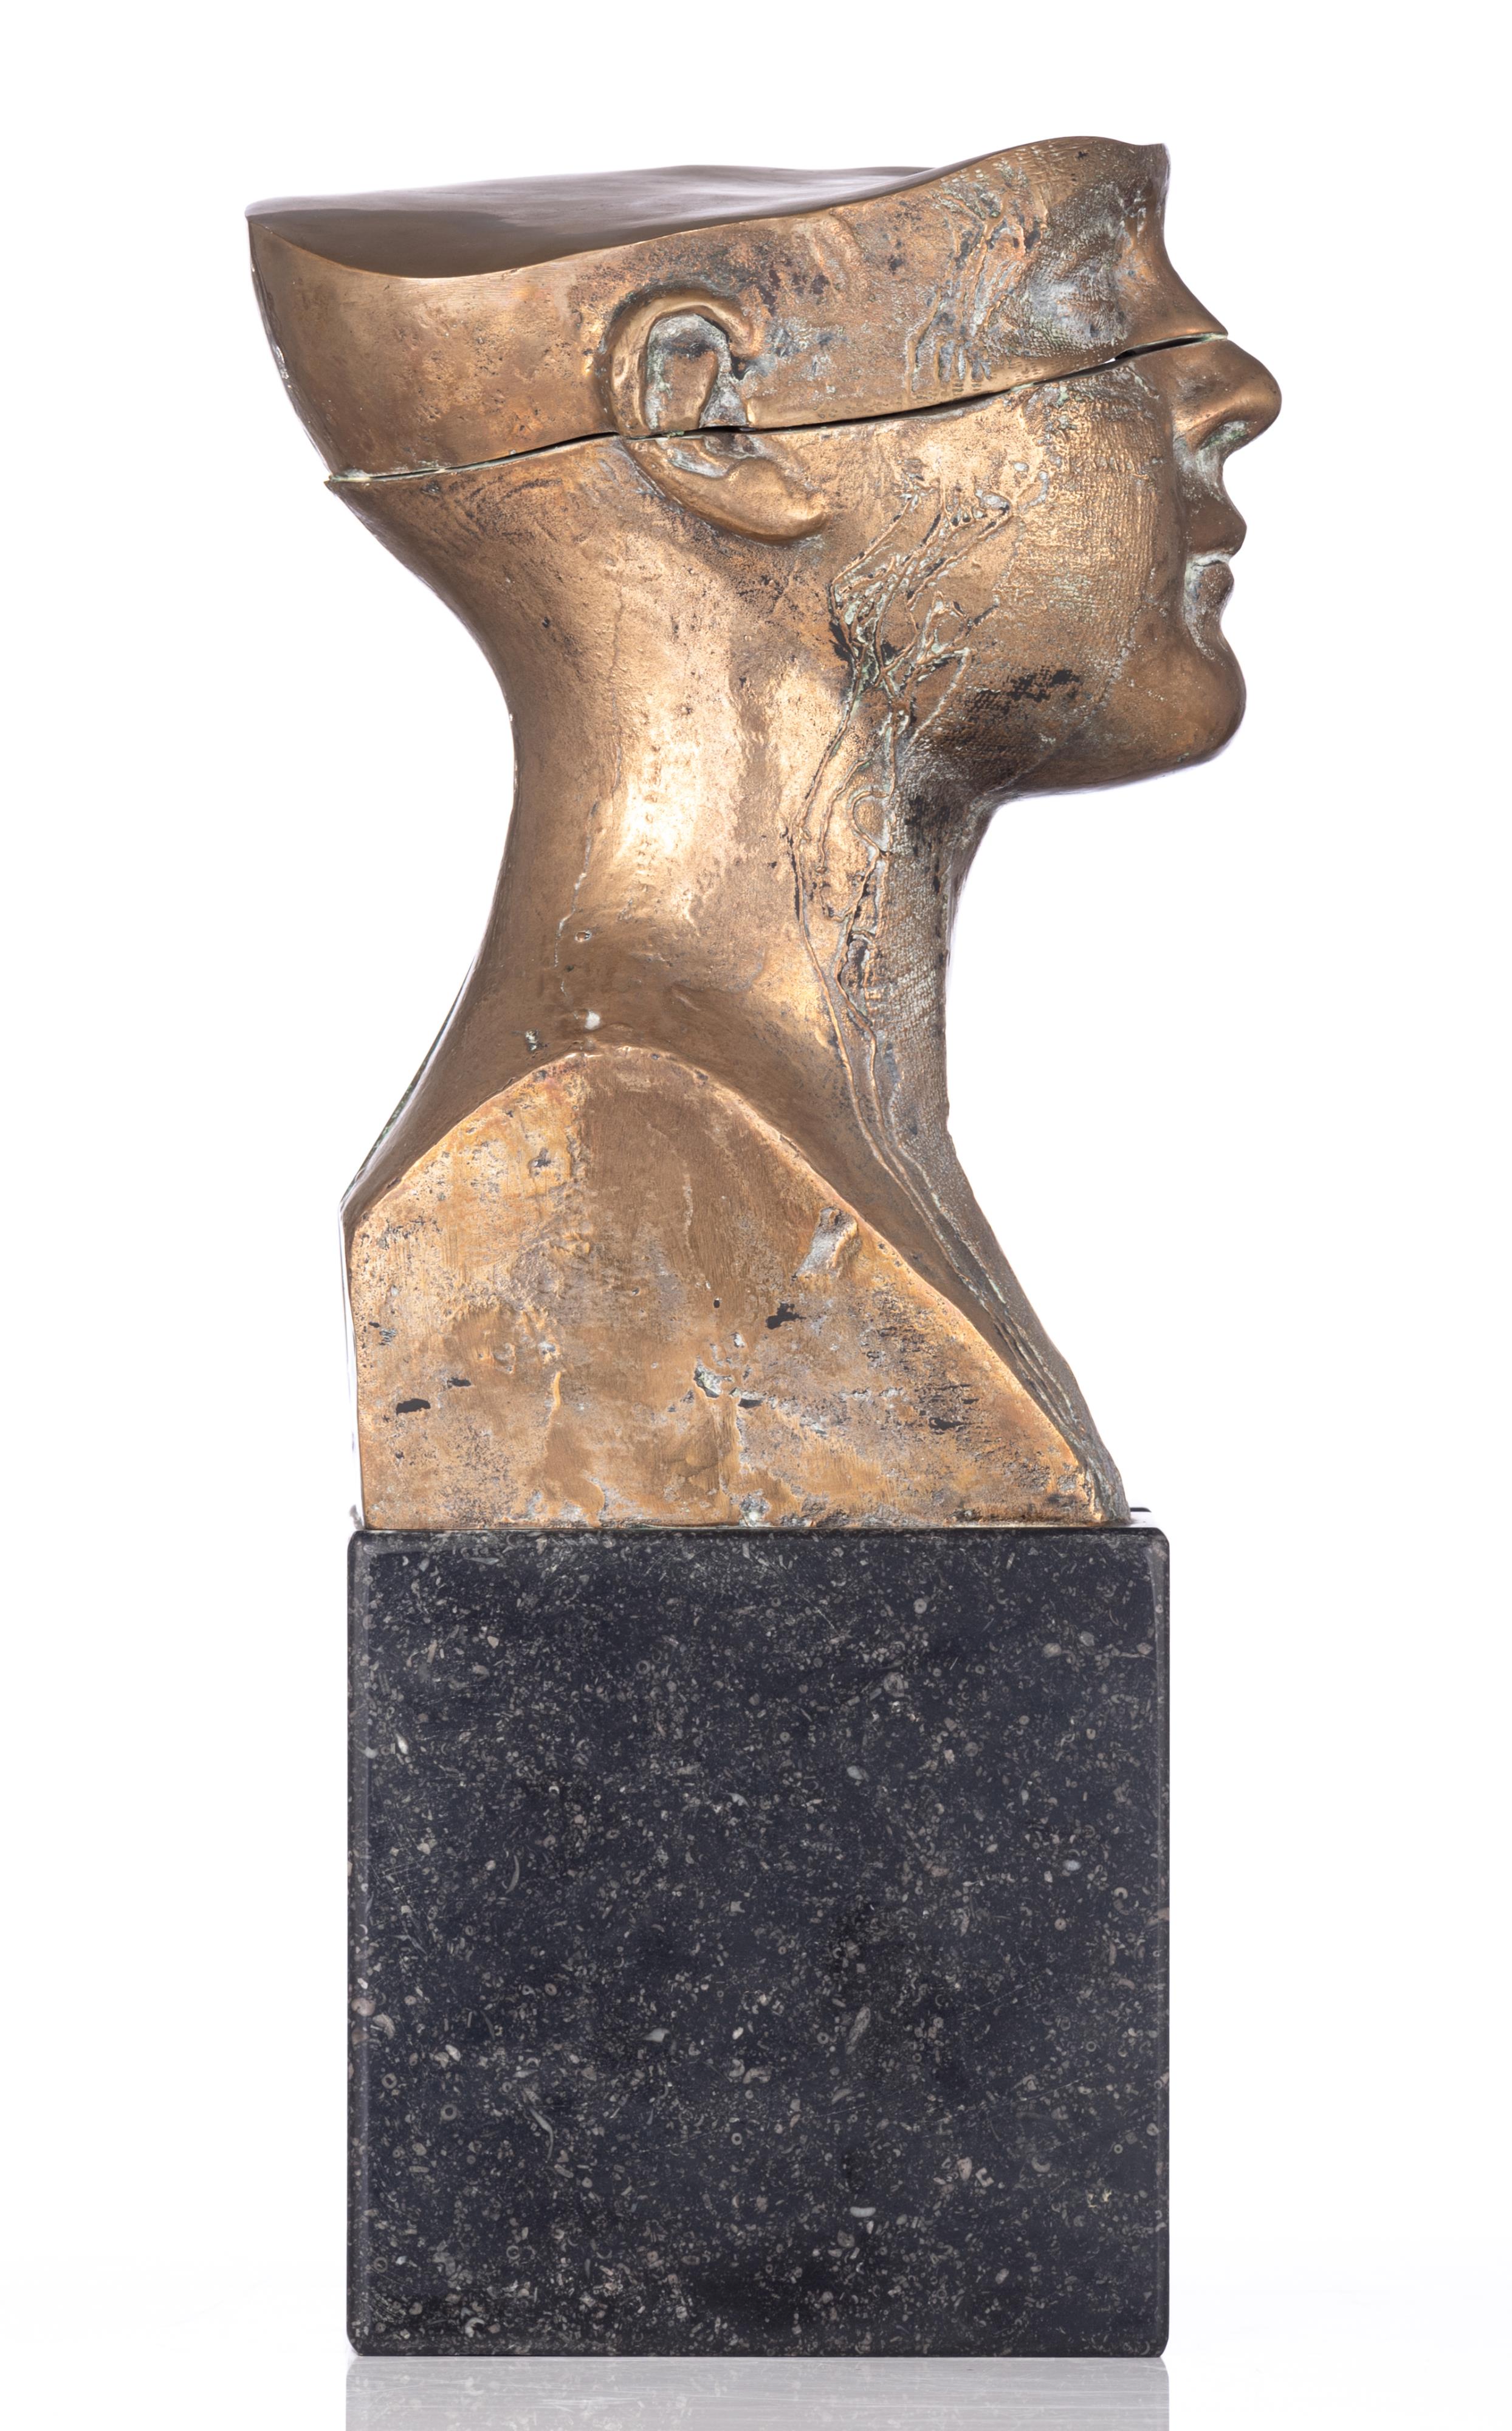 Claerhout J., untitled, patinated bronze, H 42 - W 46 cm. Added: Verjans R., untitled, dated 1975, N - Image 5 of 12